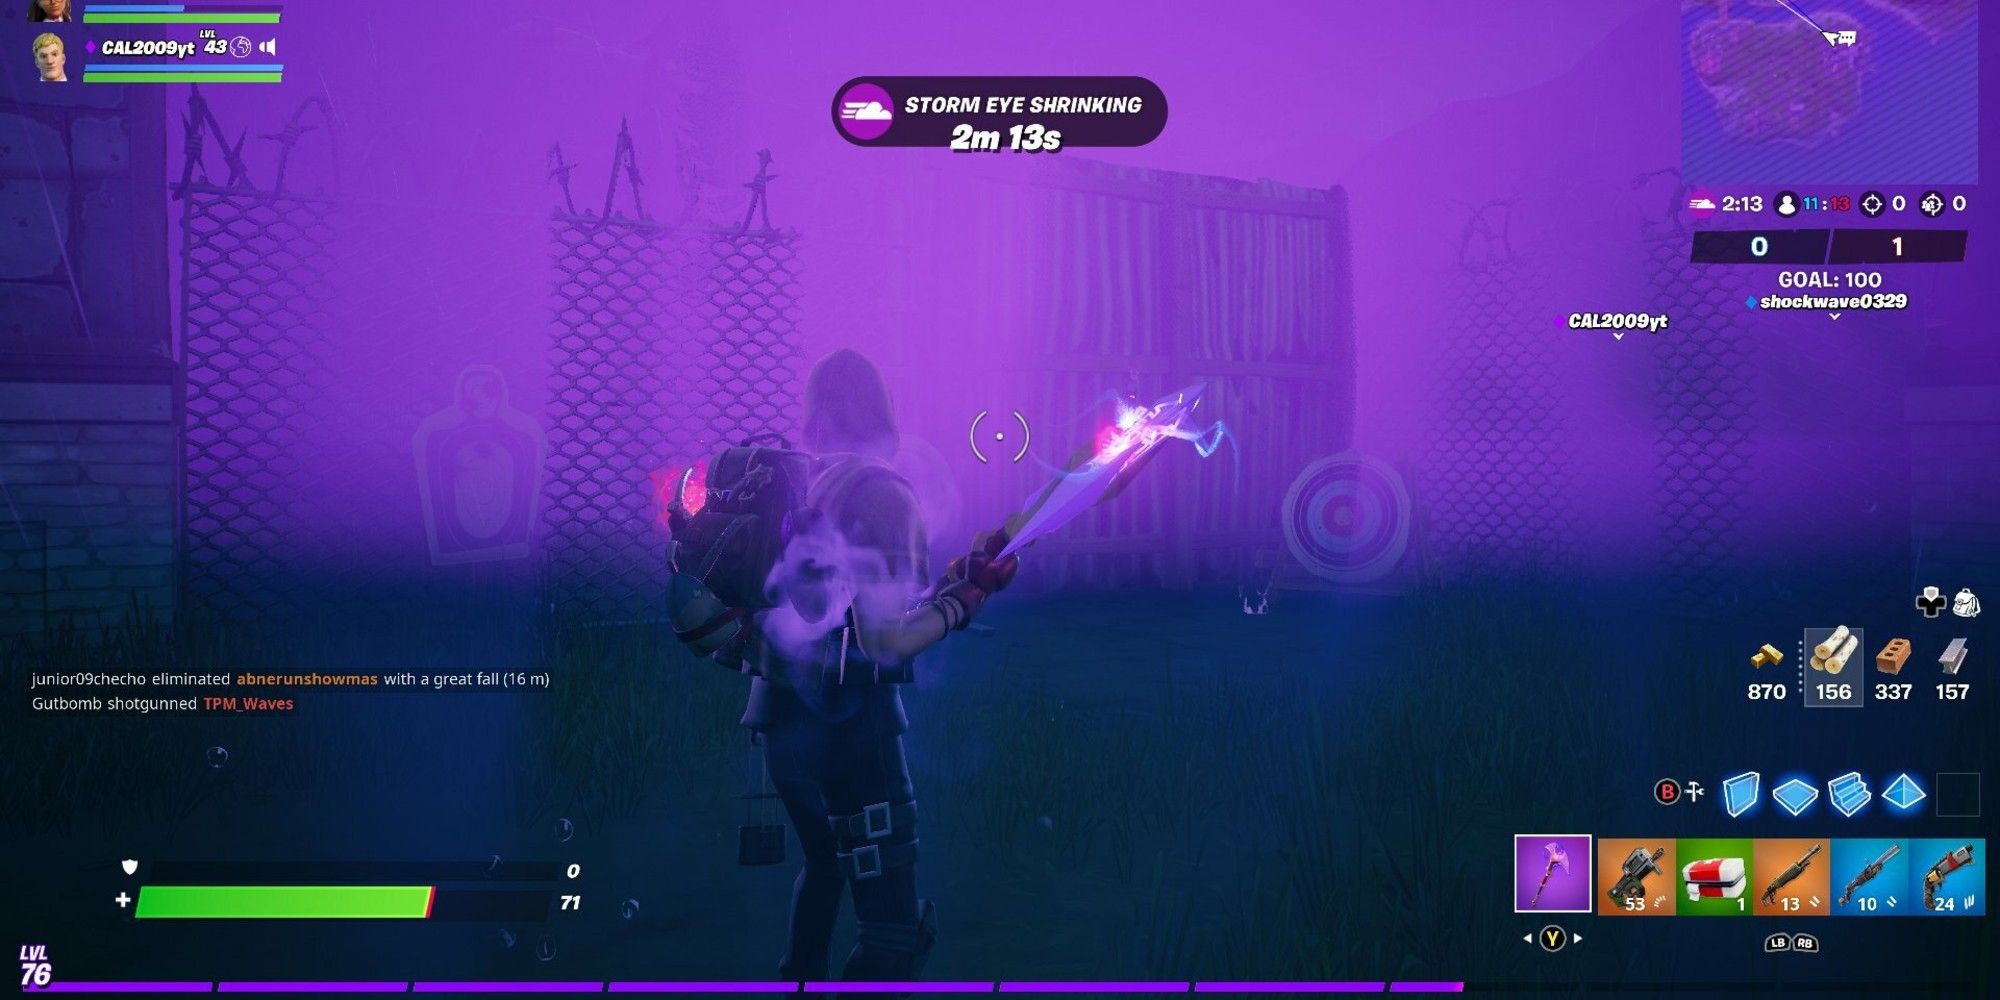 A player caught in the storm in Fortnite